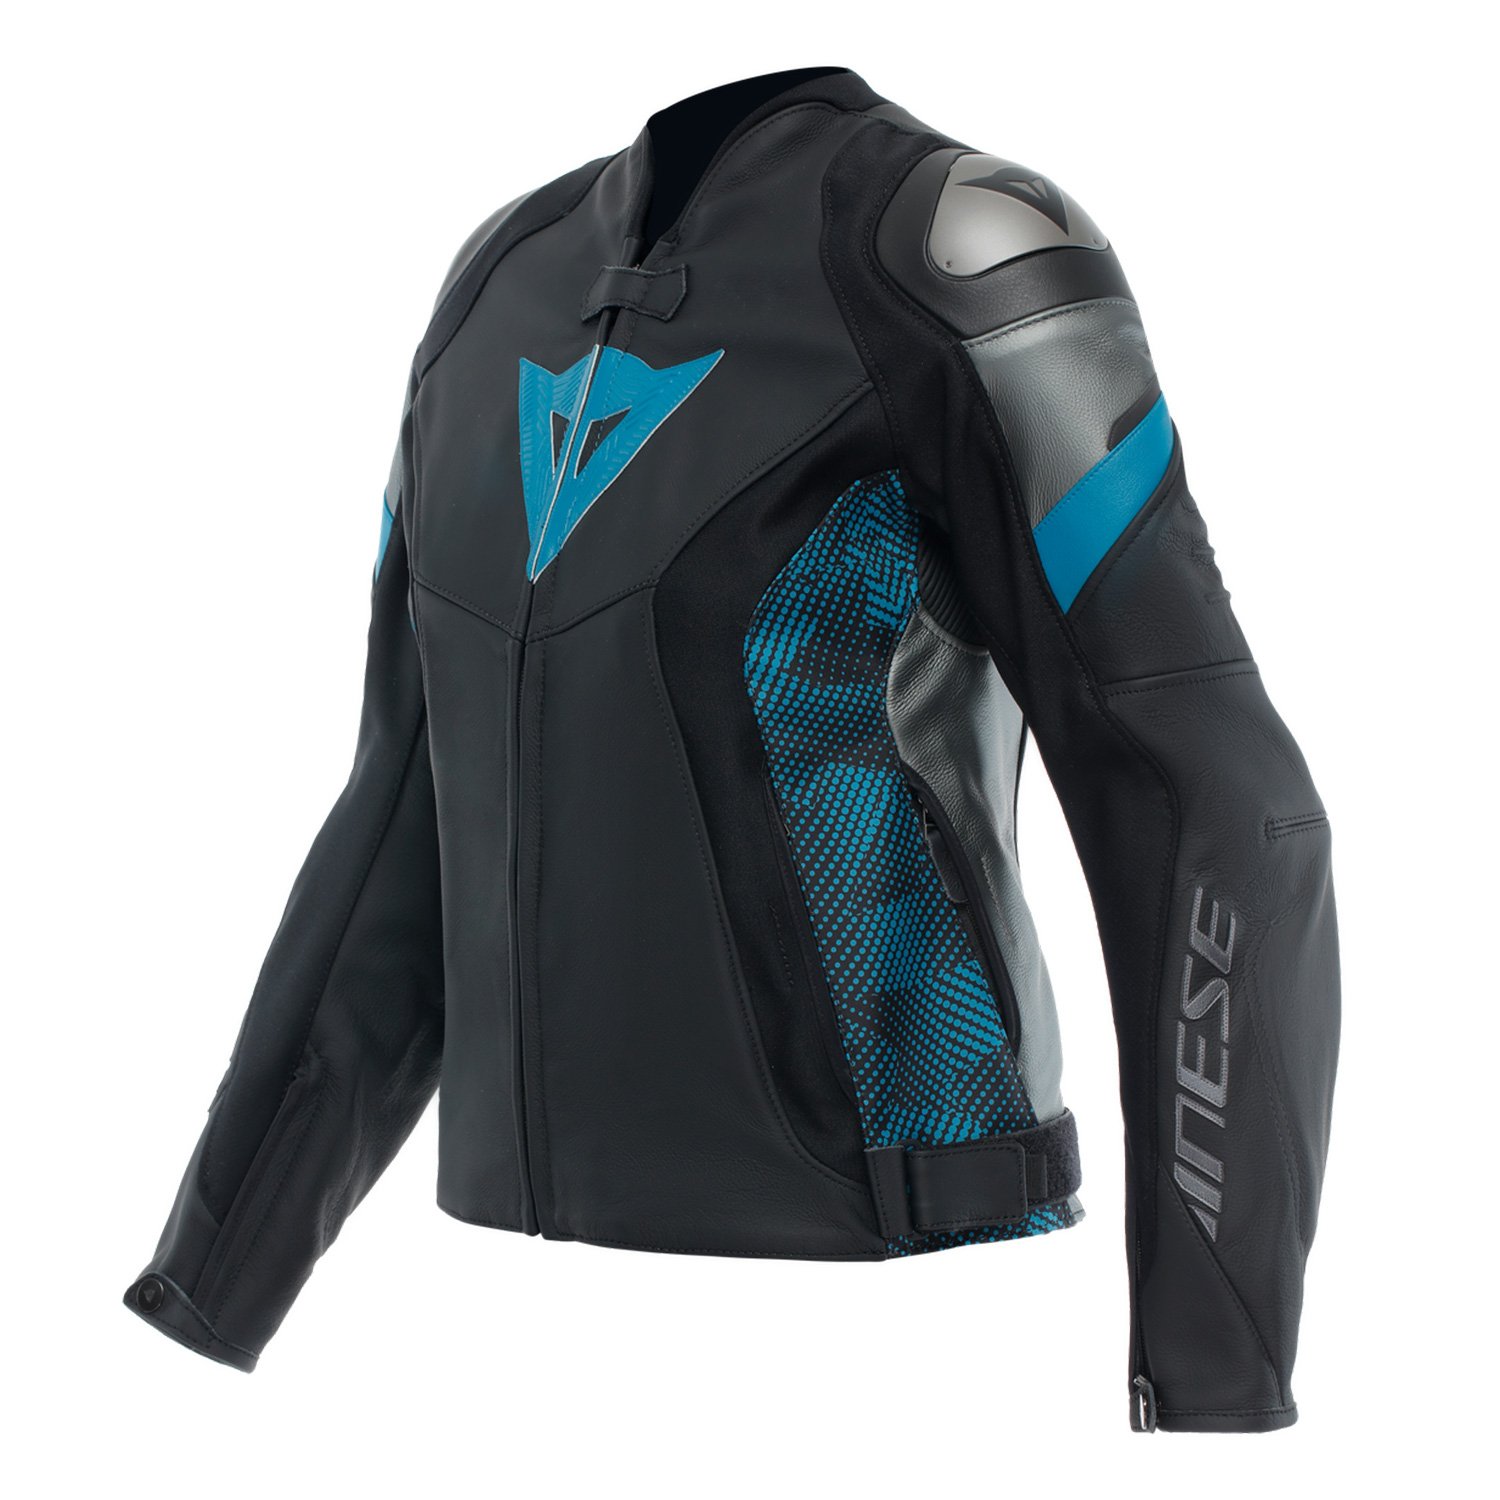 Image of Dainese Avro 5 Leather Jacket WMN Black Teal Anthracite Size 42 EN